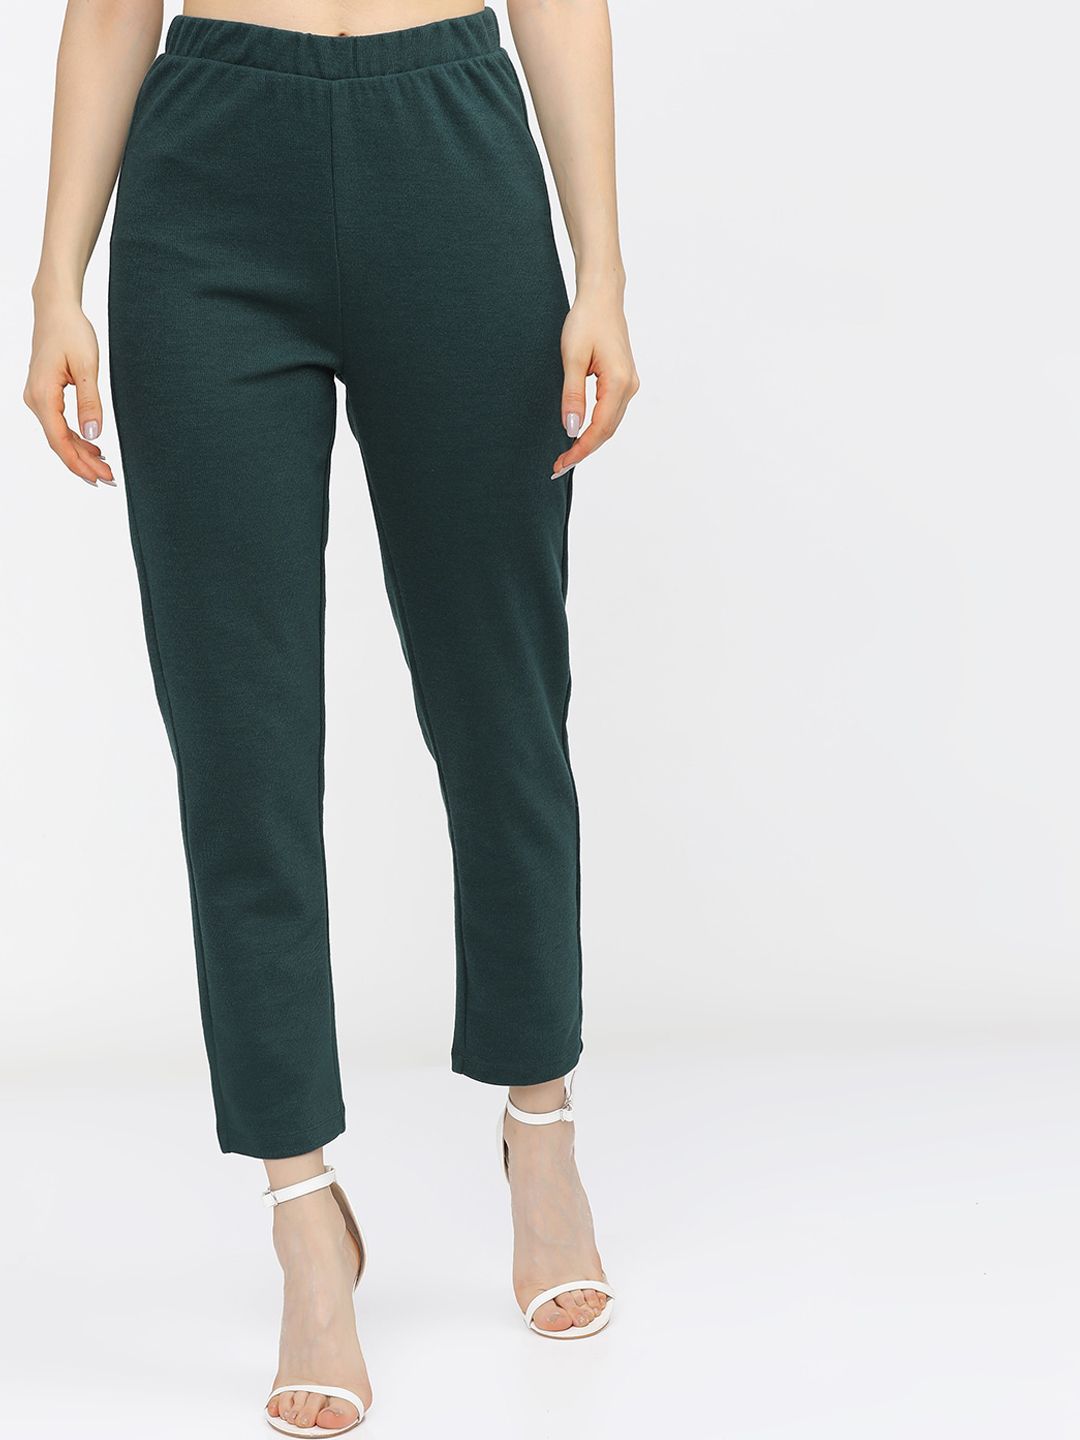 Vishudh Women Green Straight Fit Cigarette Trousers Price in India